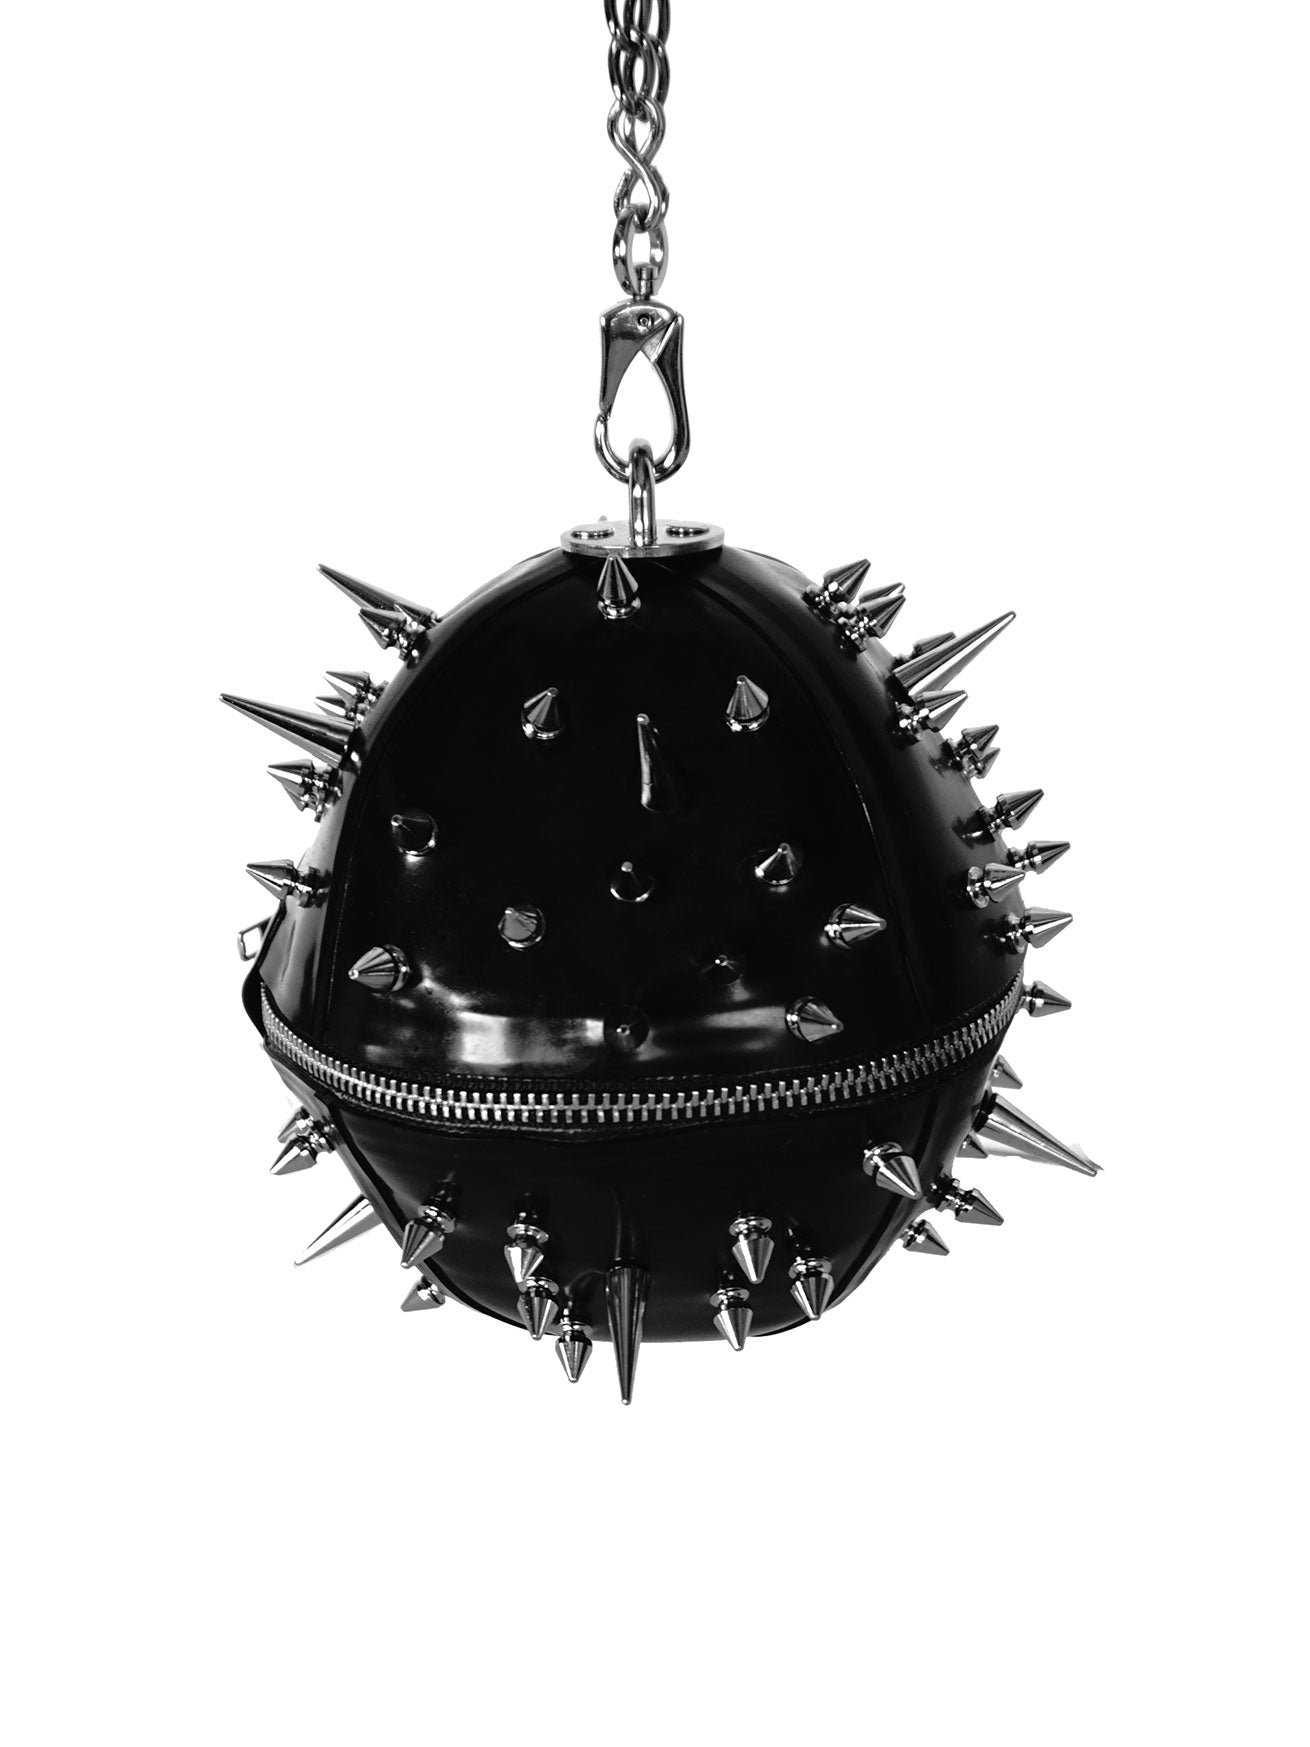 Spiked Rubber Bag